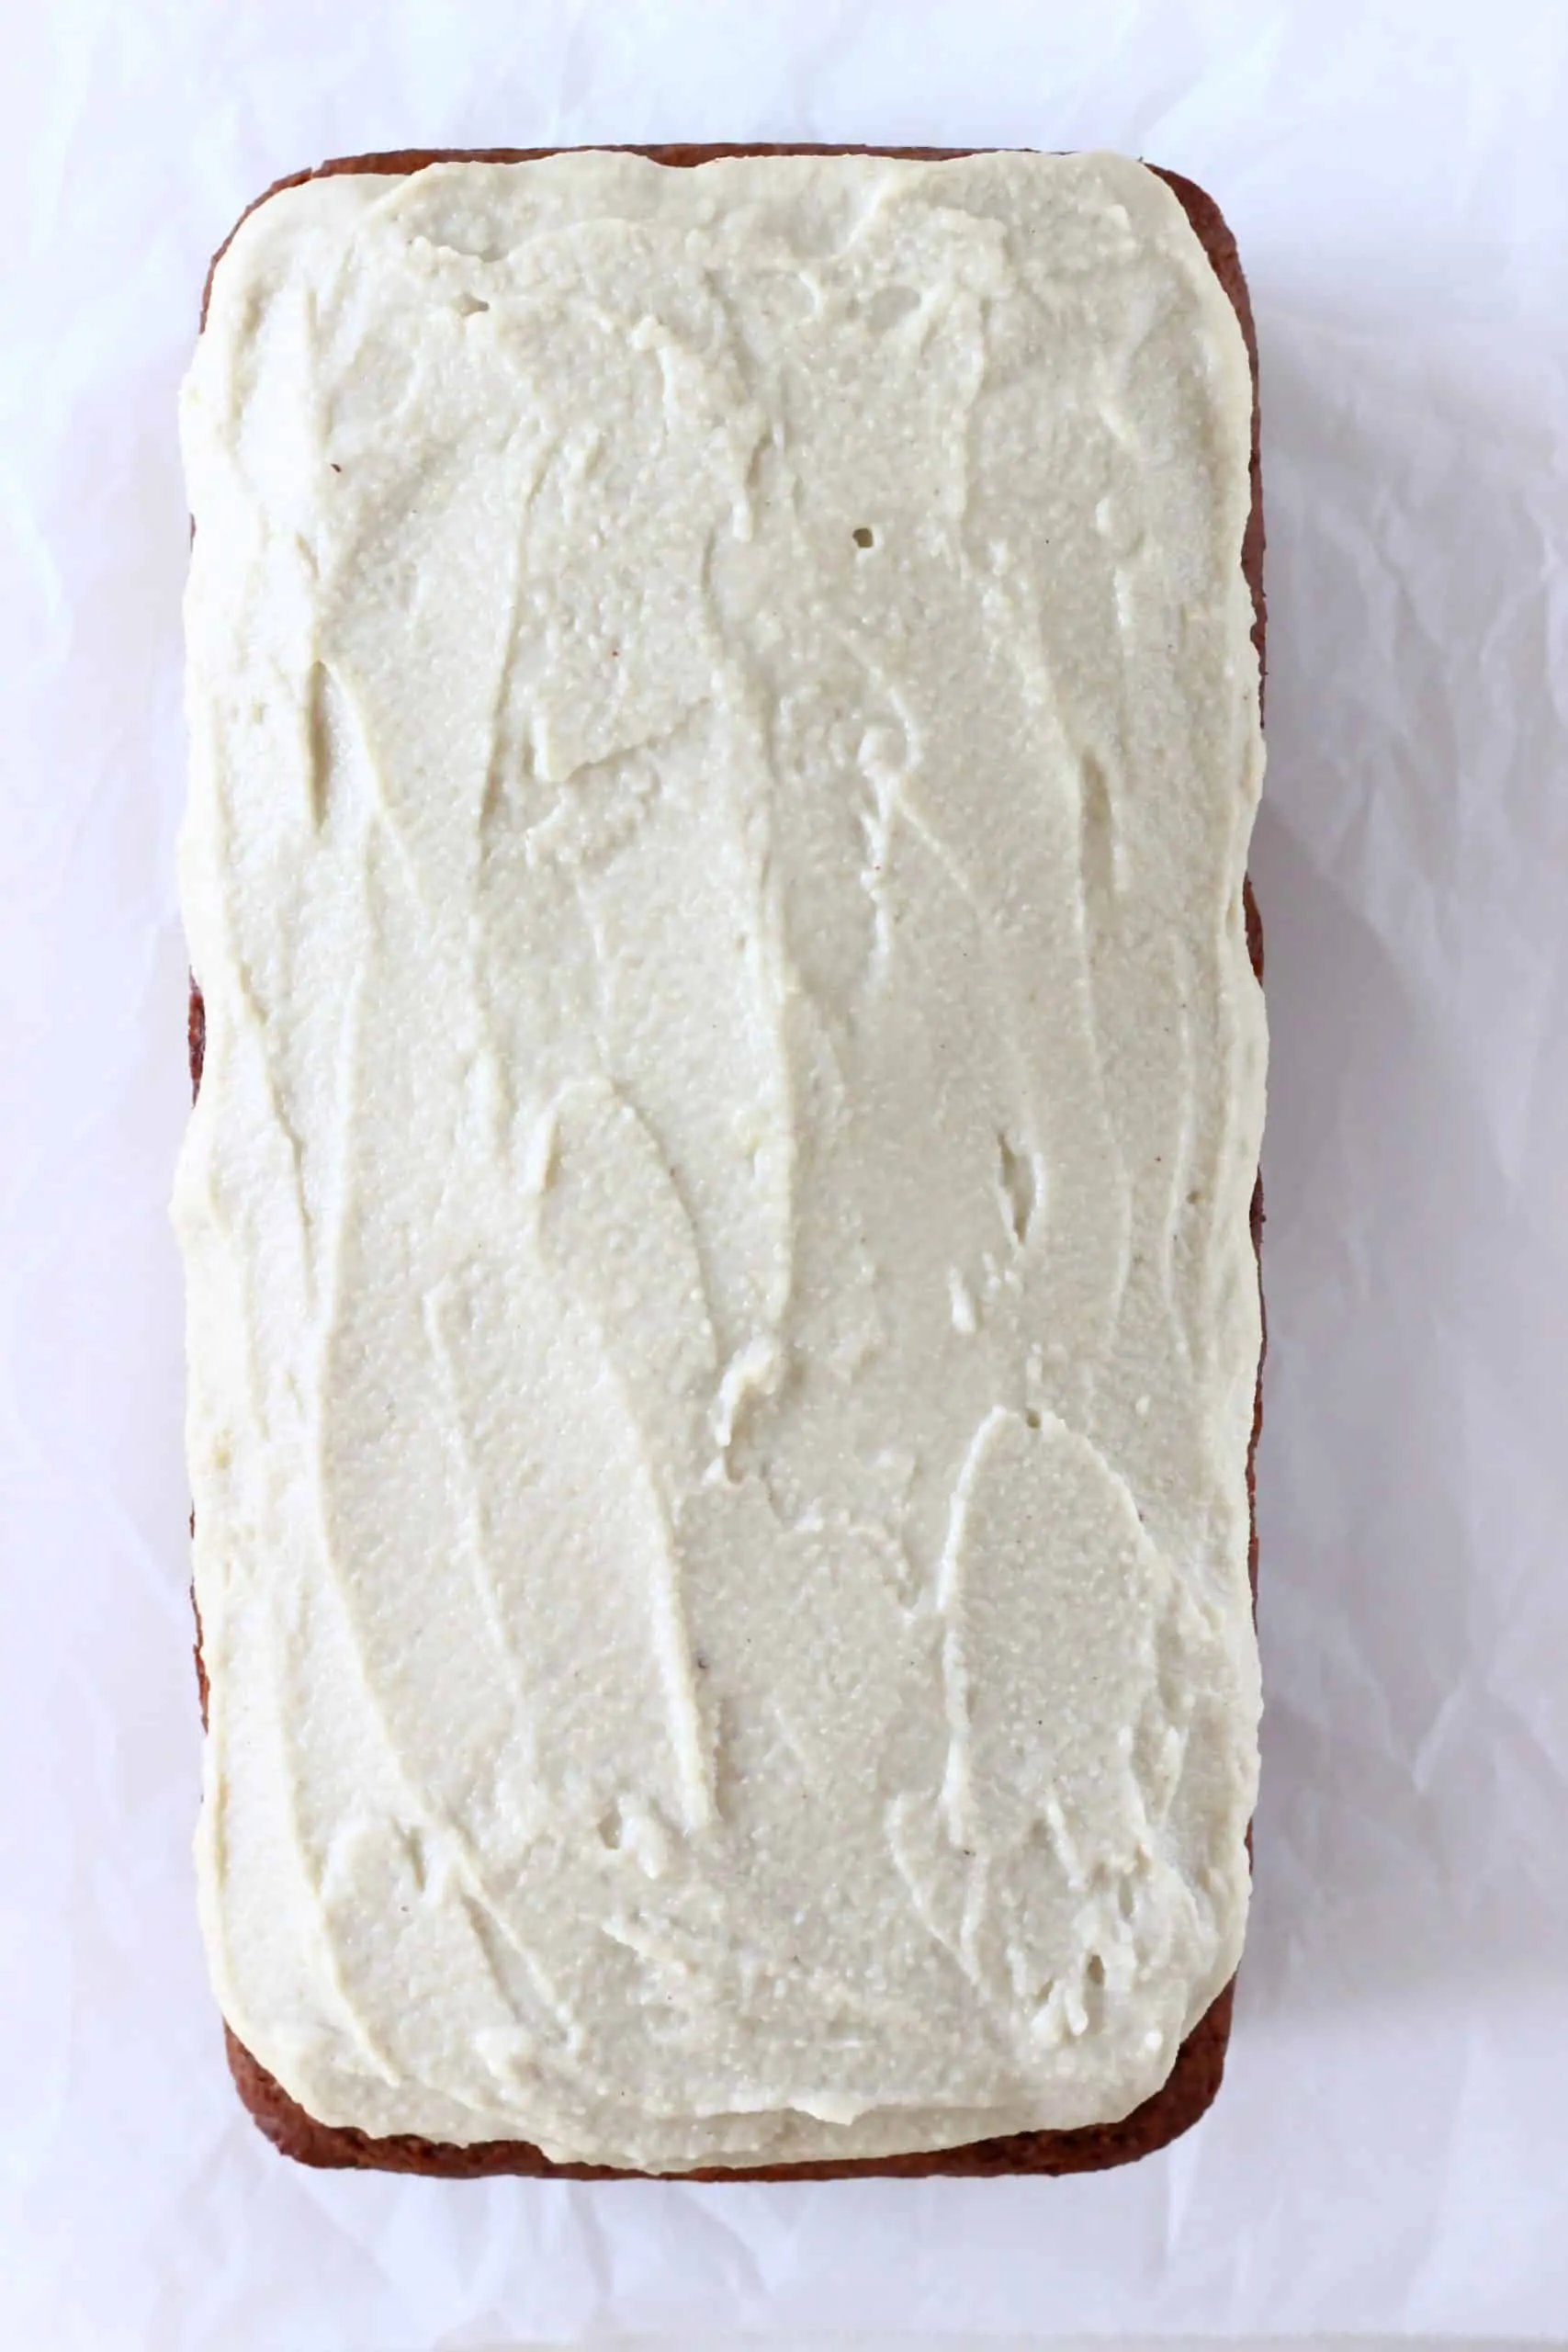 A gluten-free vegan gingerbread loaf cake with vegan cream cheese frosting spread on top